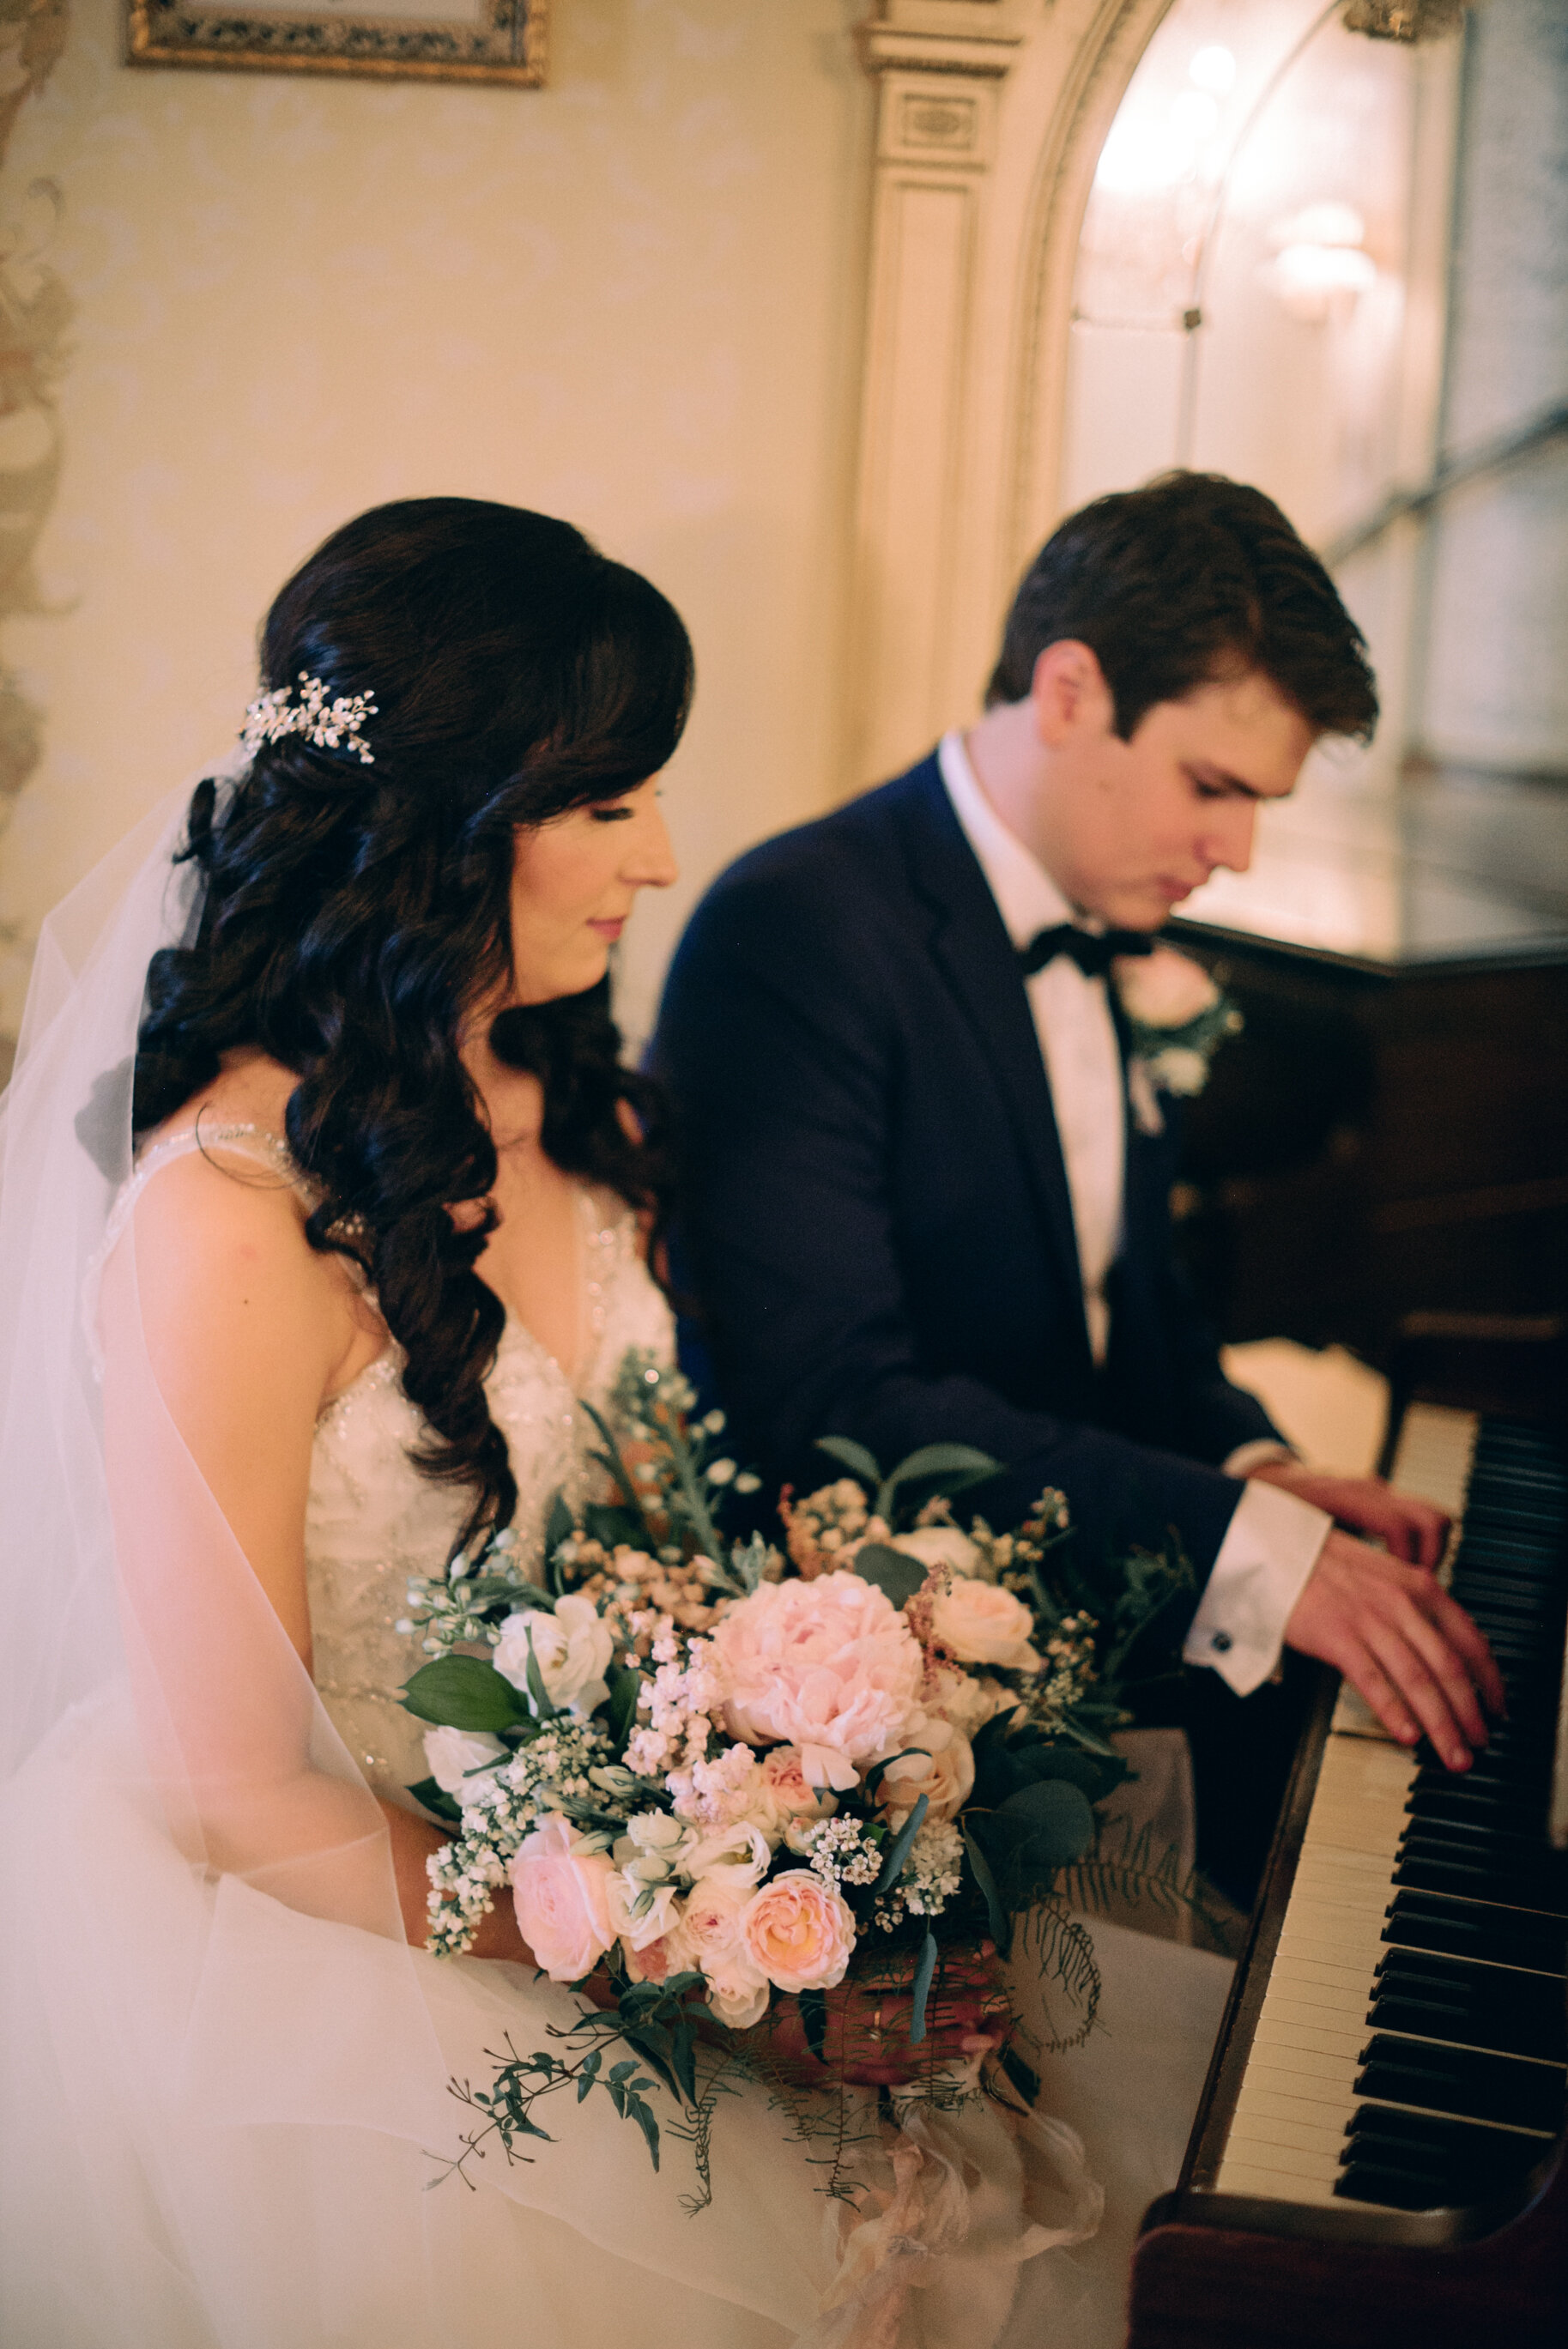 Violette-fleurs-event-design-roseville-love-and-theory-co-photography-sacramento-grand-island-mansion-Florist-Flowers-Traditional-Groom-Bride-bouquet-piano.JPG